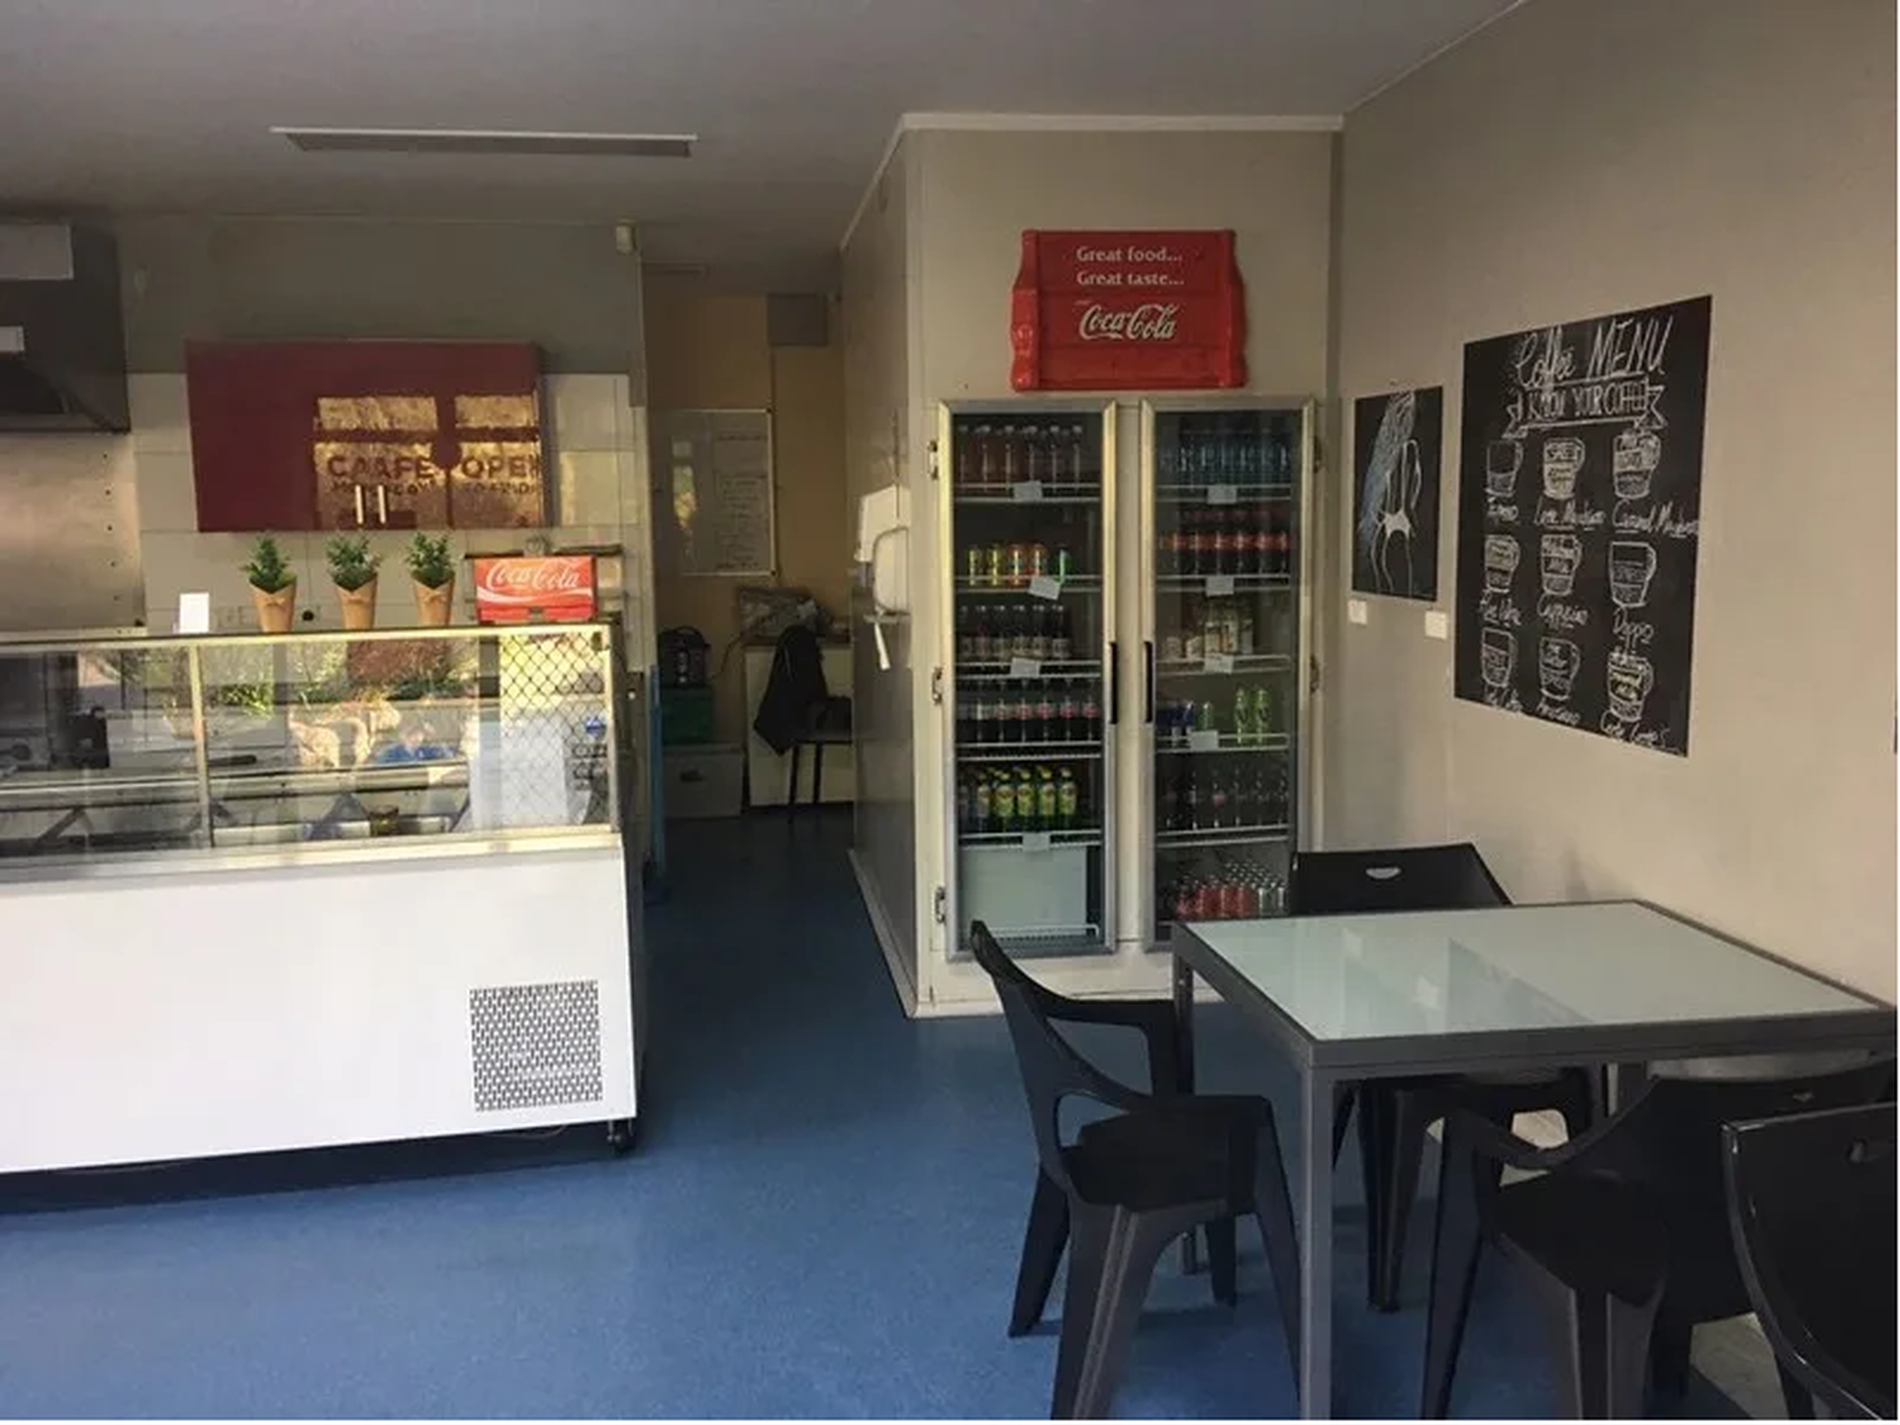 SOLD - 5 Day Cafe Business For Sale Mitcham